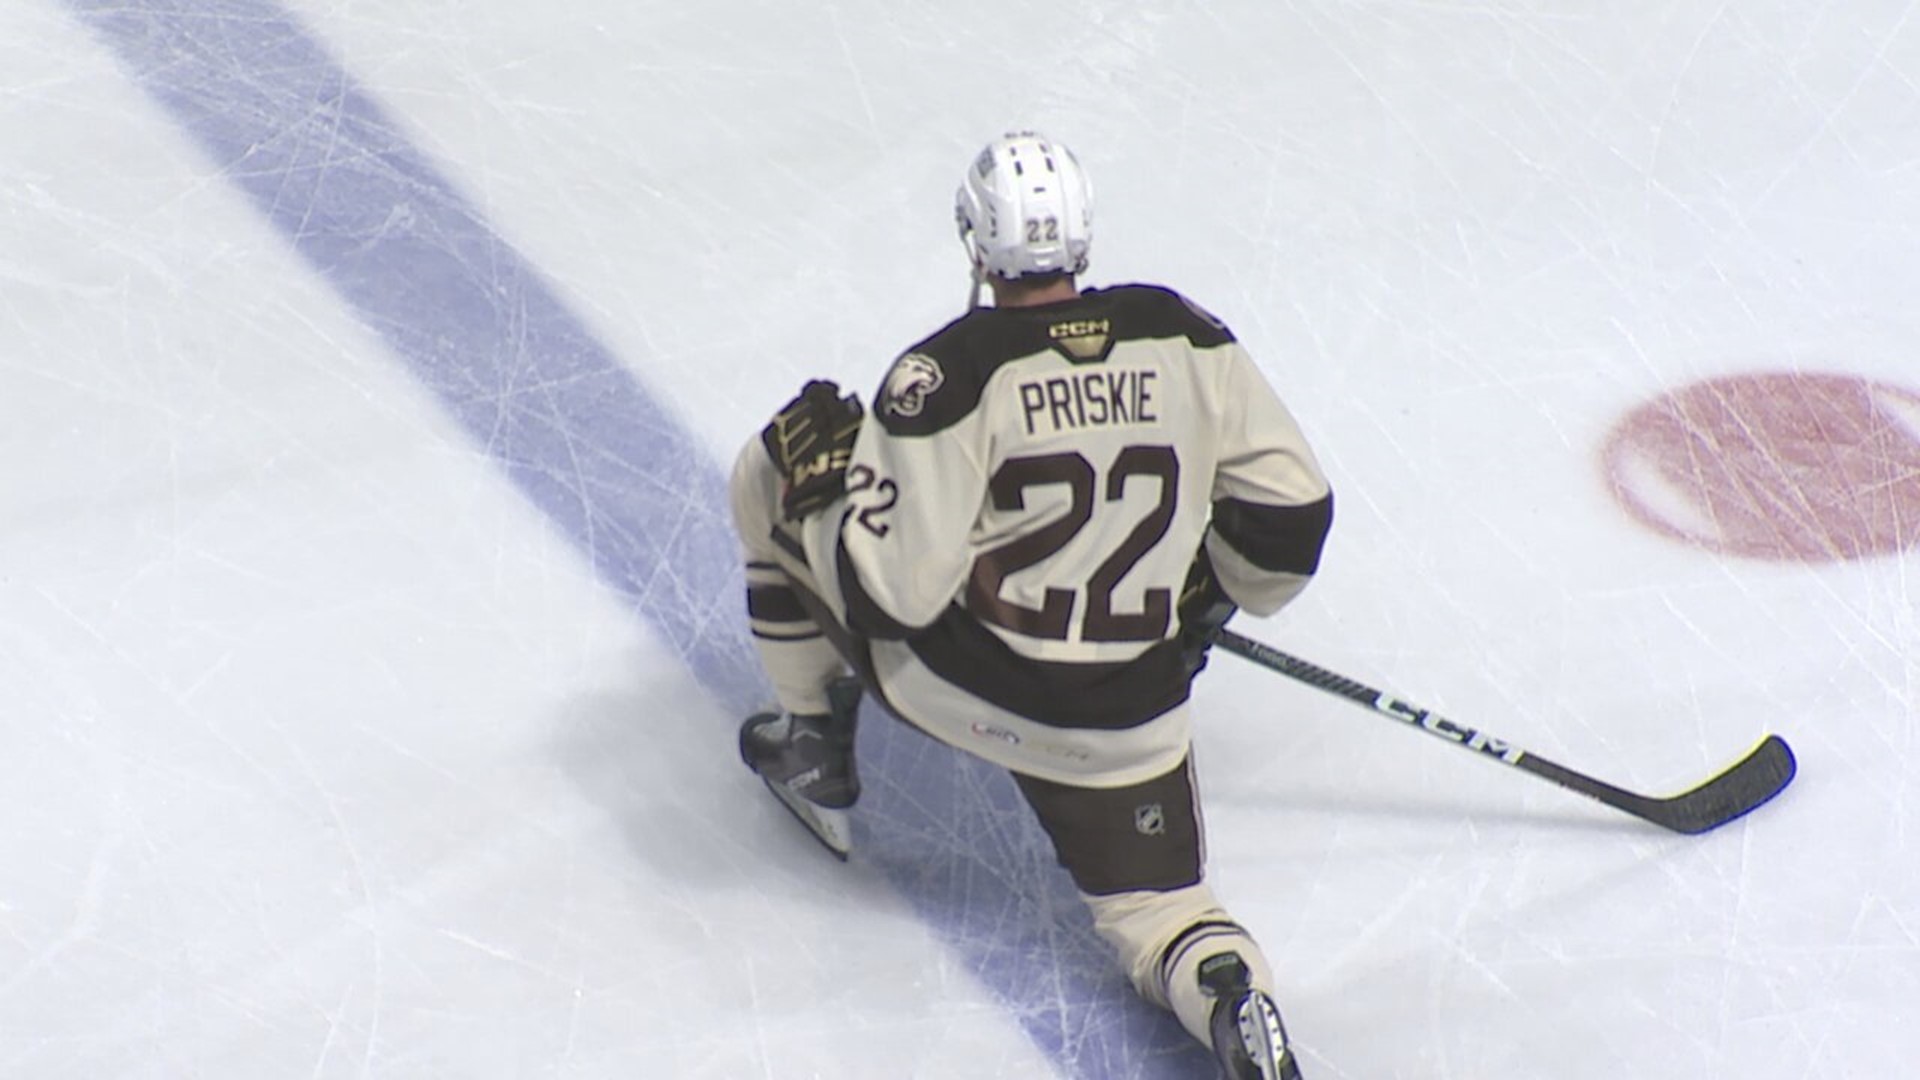 Hershey Bears defenseman Chase Priskie provides insight into how he performs and prepares during the Jewish holiday.